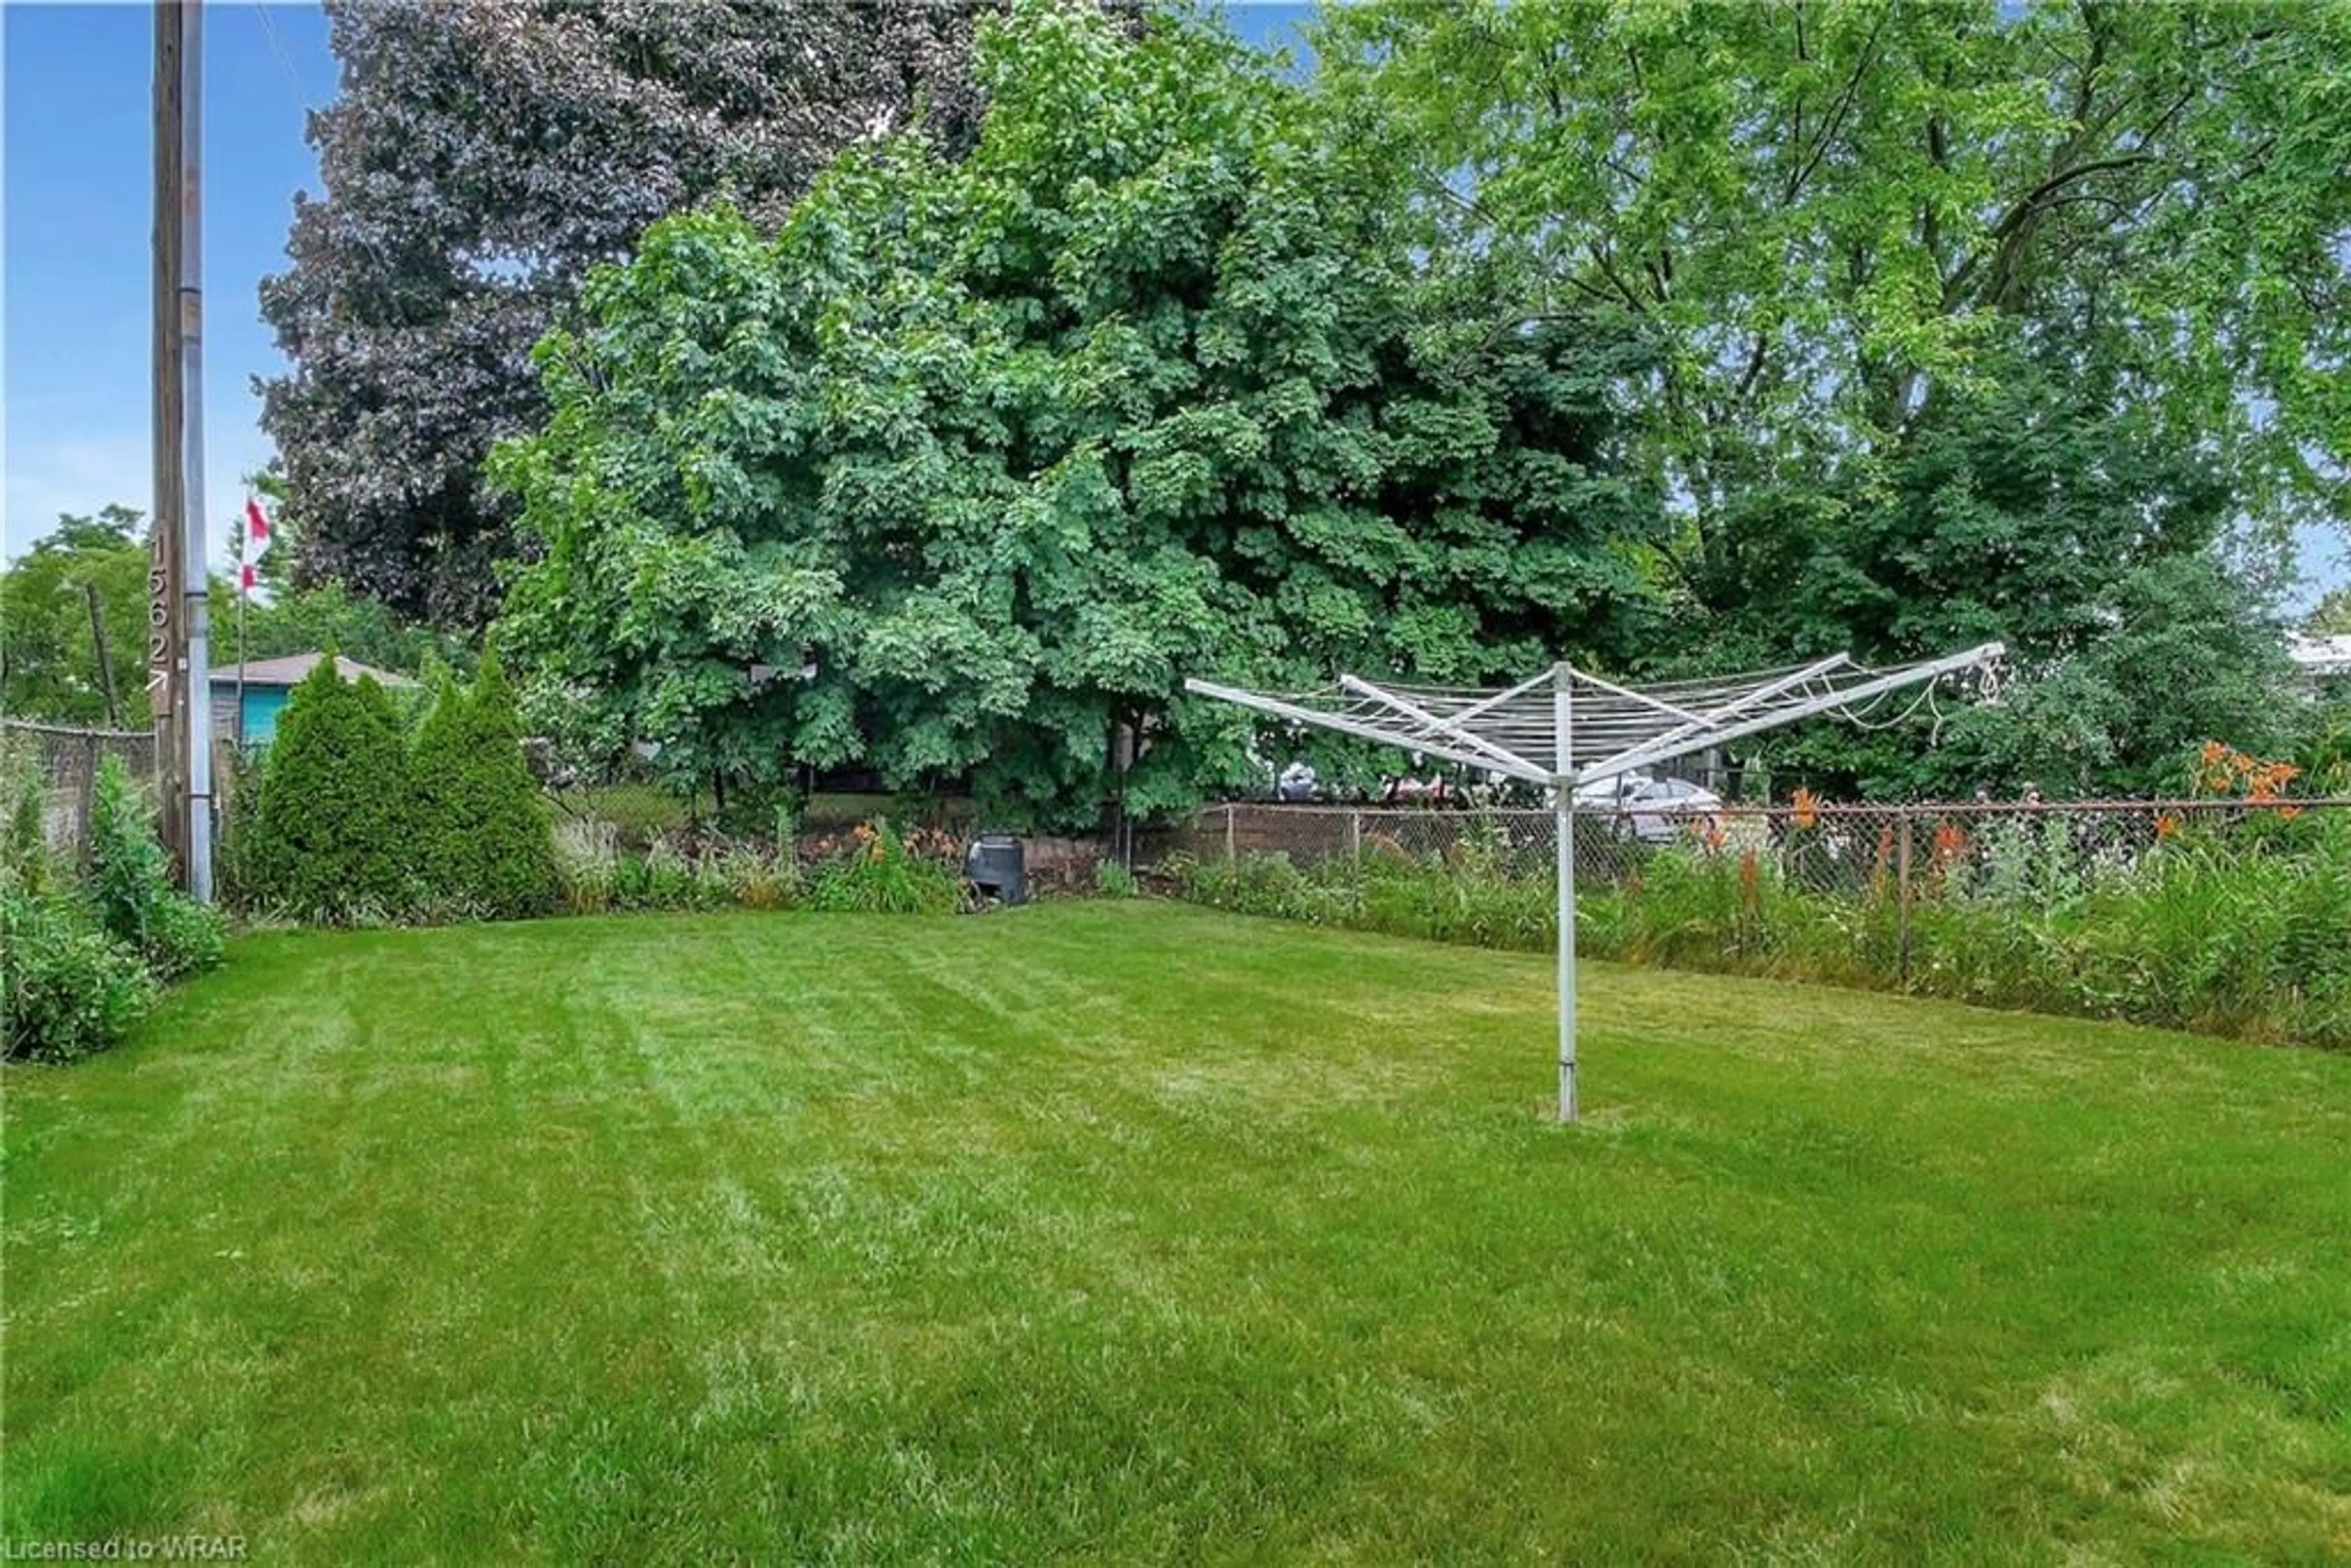 Fenced yard for 1554 Concession Rd, Cambridge Ontario N3H 4L9